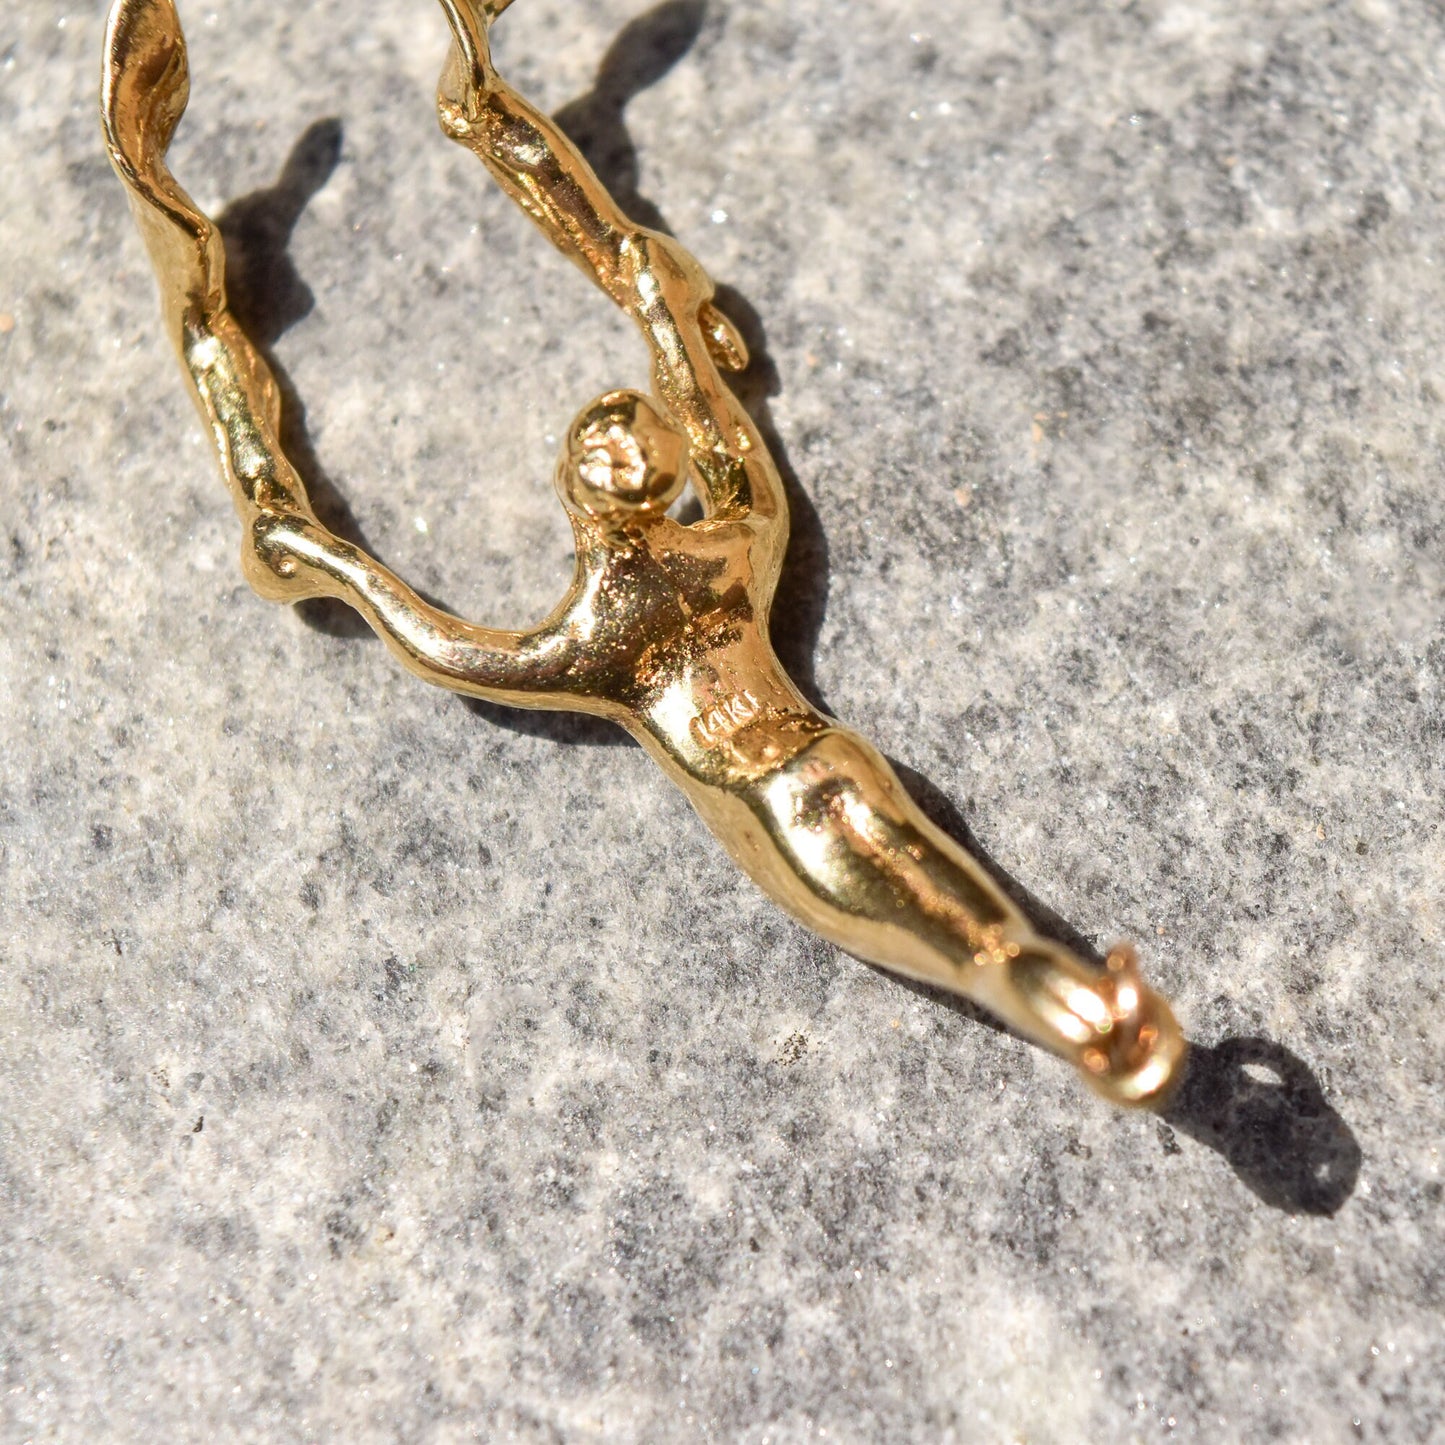 Solid 14K Flying Trapeze Acrobat Pendant, Sculpted Yellow Gold Figural Pendant/Charm, Estate Jewelry, 3 1/8" L